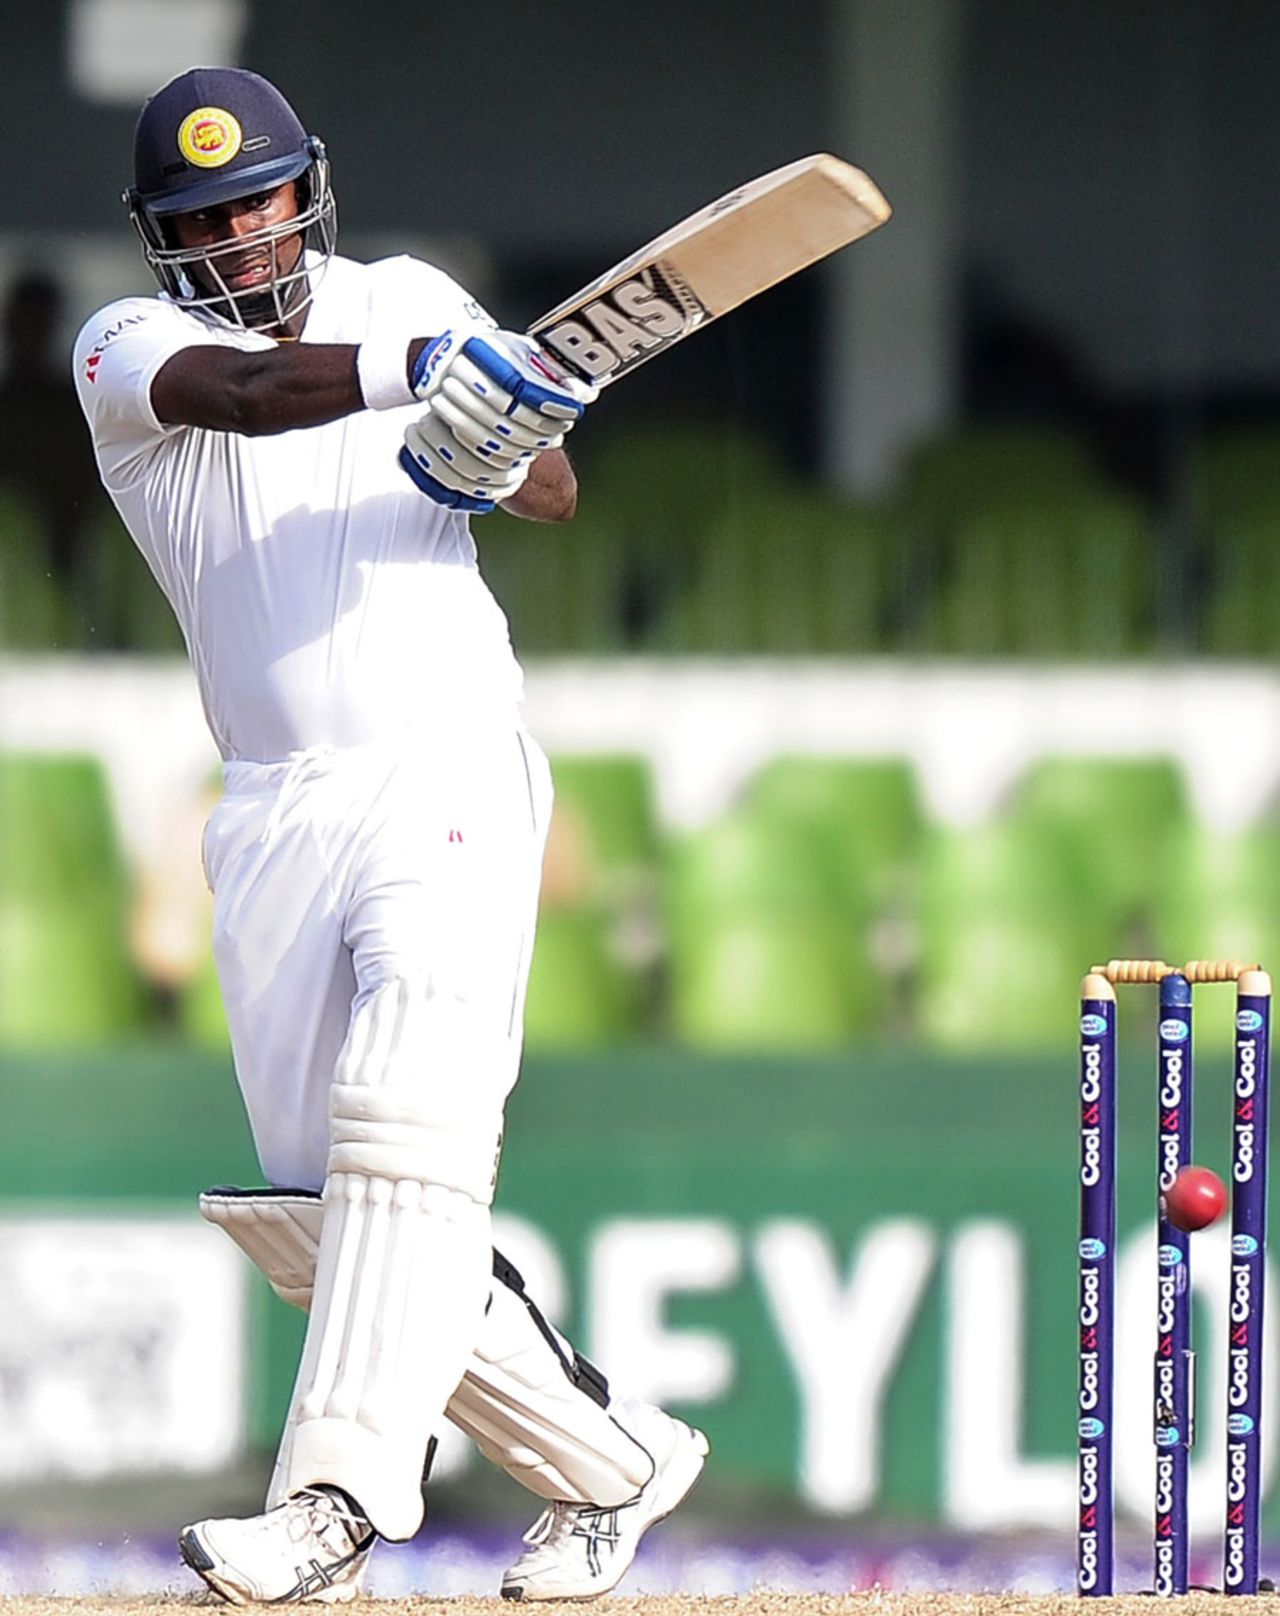 Angelo Mathews became the 11th Sri Lankan to collect 3000 Test runs, Sri Lanka v Pakistan, 2nd Test, Colombo, 1st day, August 14, 2014